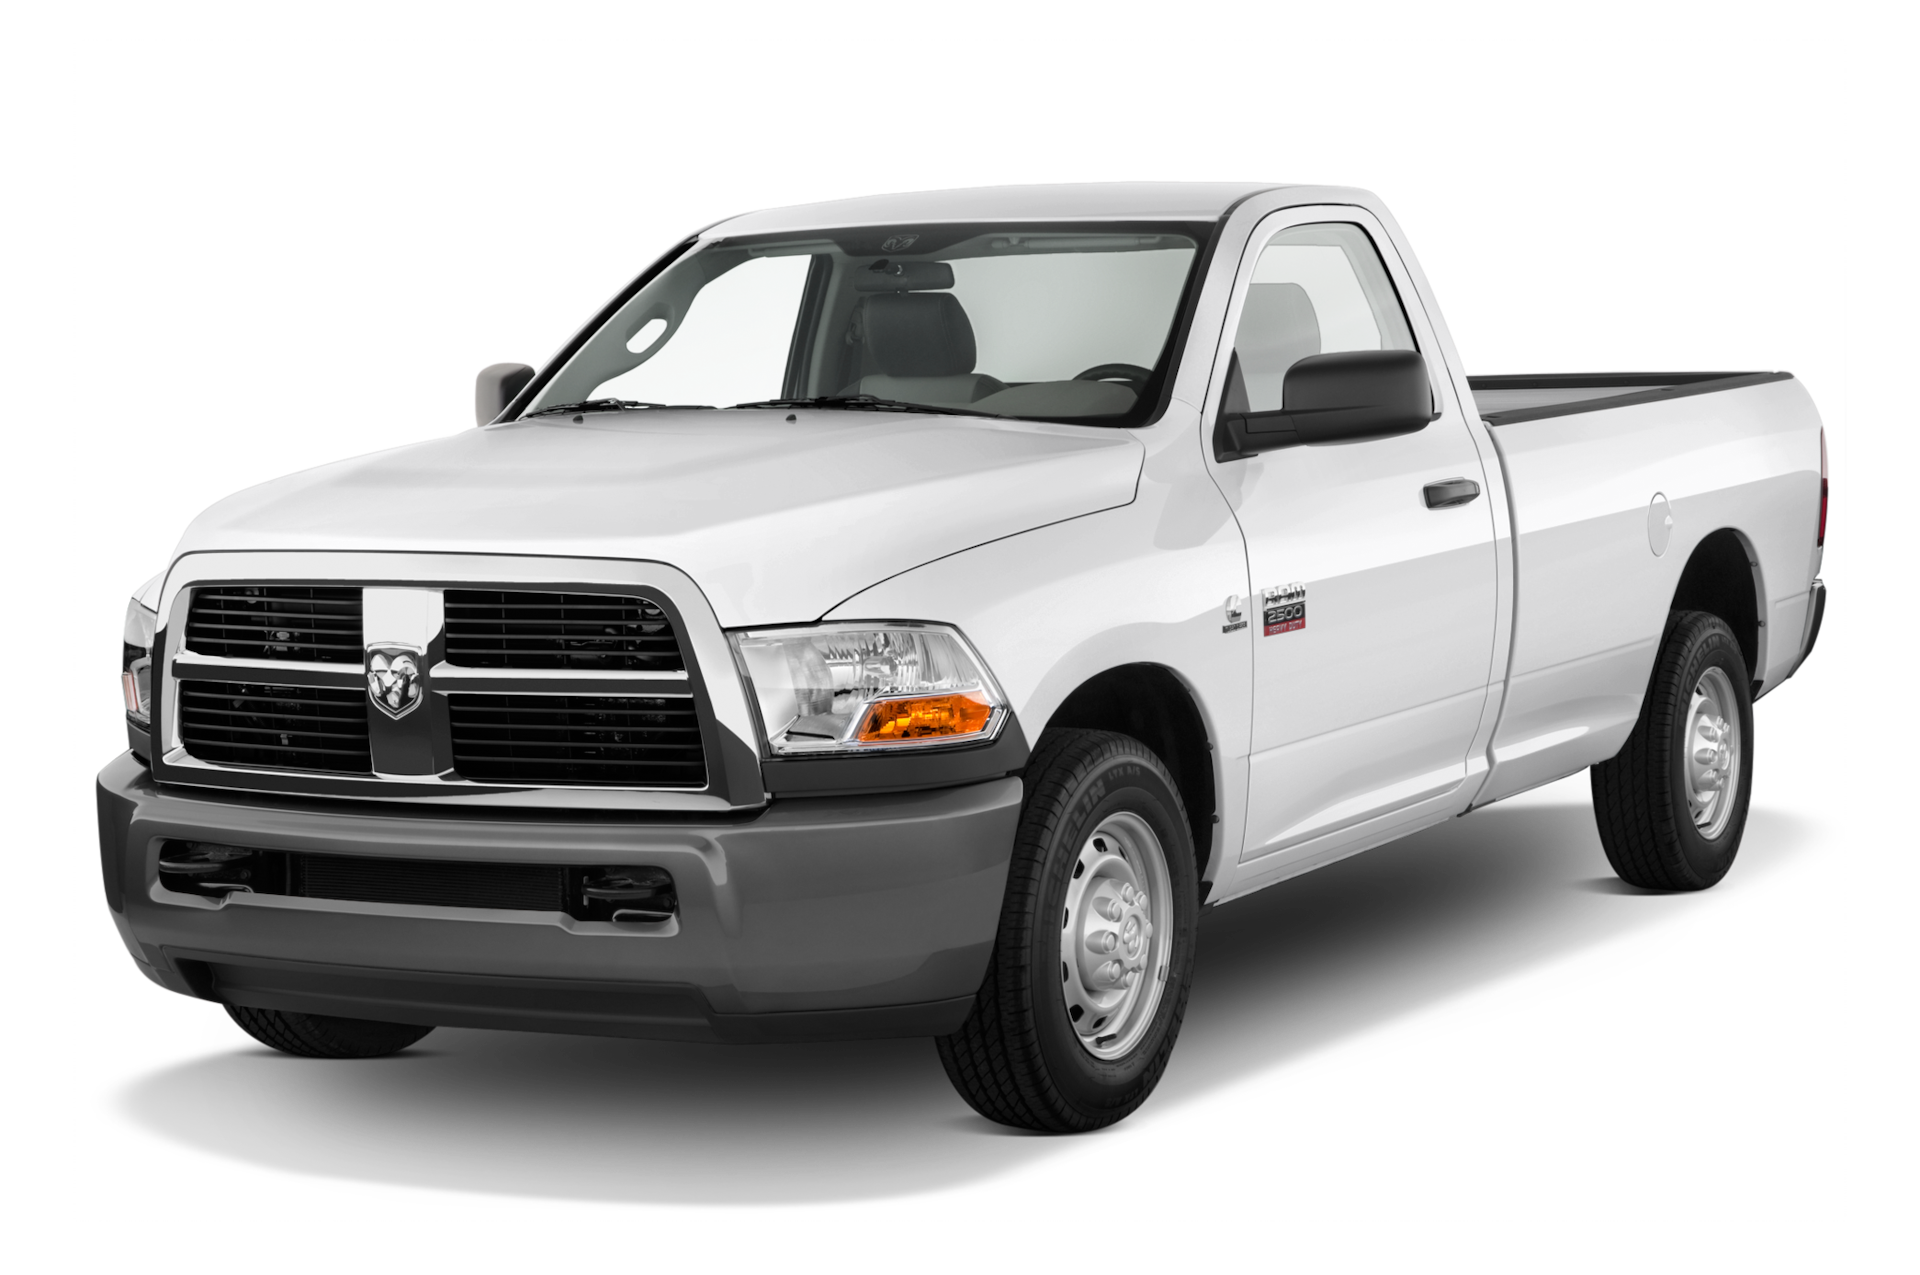 2010 Dodge Ram 2500 Prices, Reviews, and Photos - MotorTrend